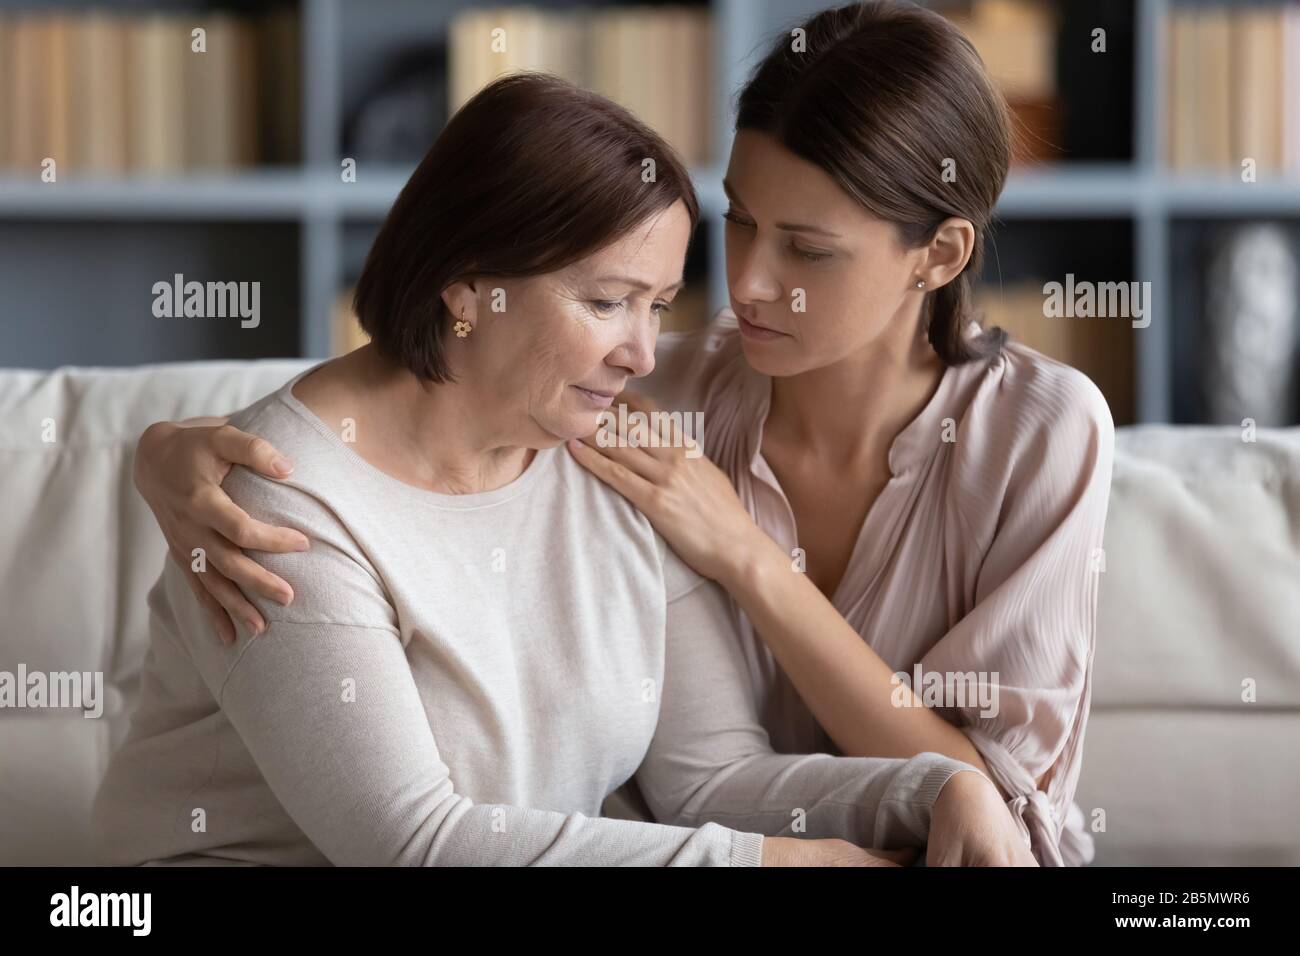 Compassionate woman embracing shoulder of unhappy stressed middle aged mommy. Stock Photo